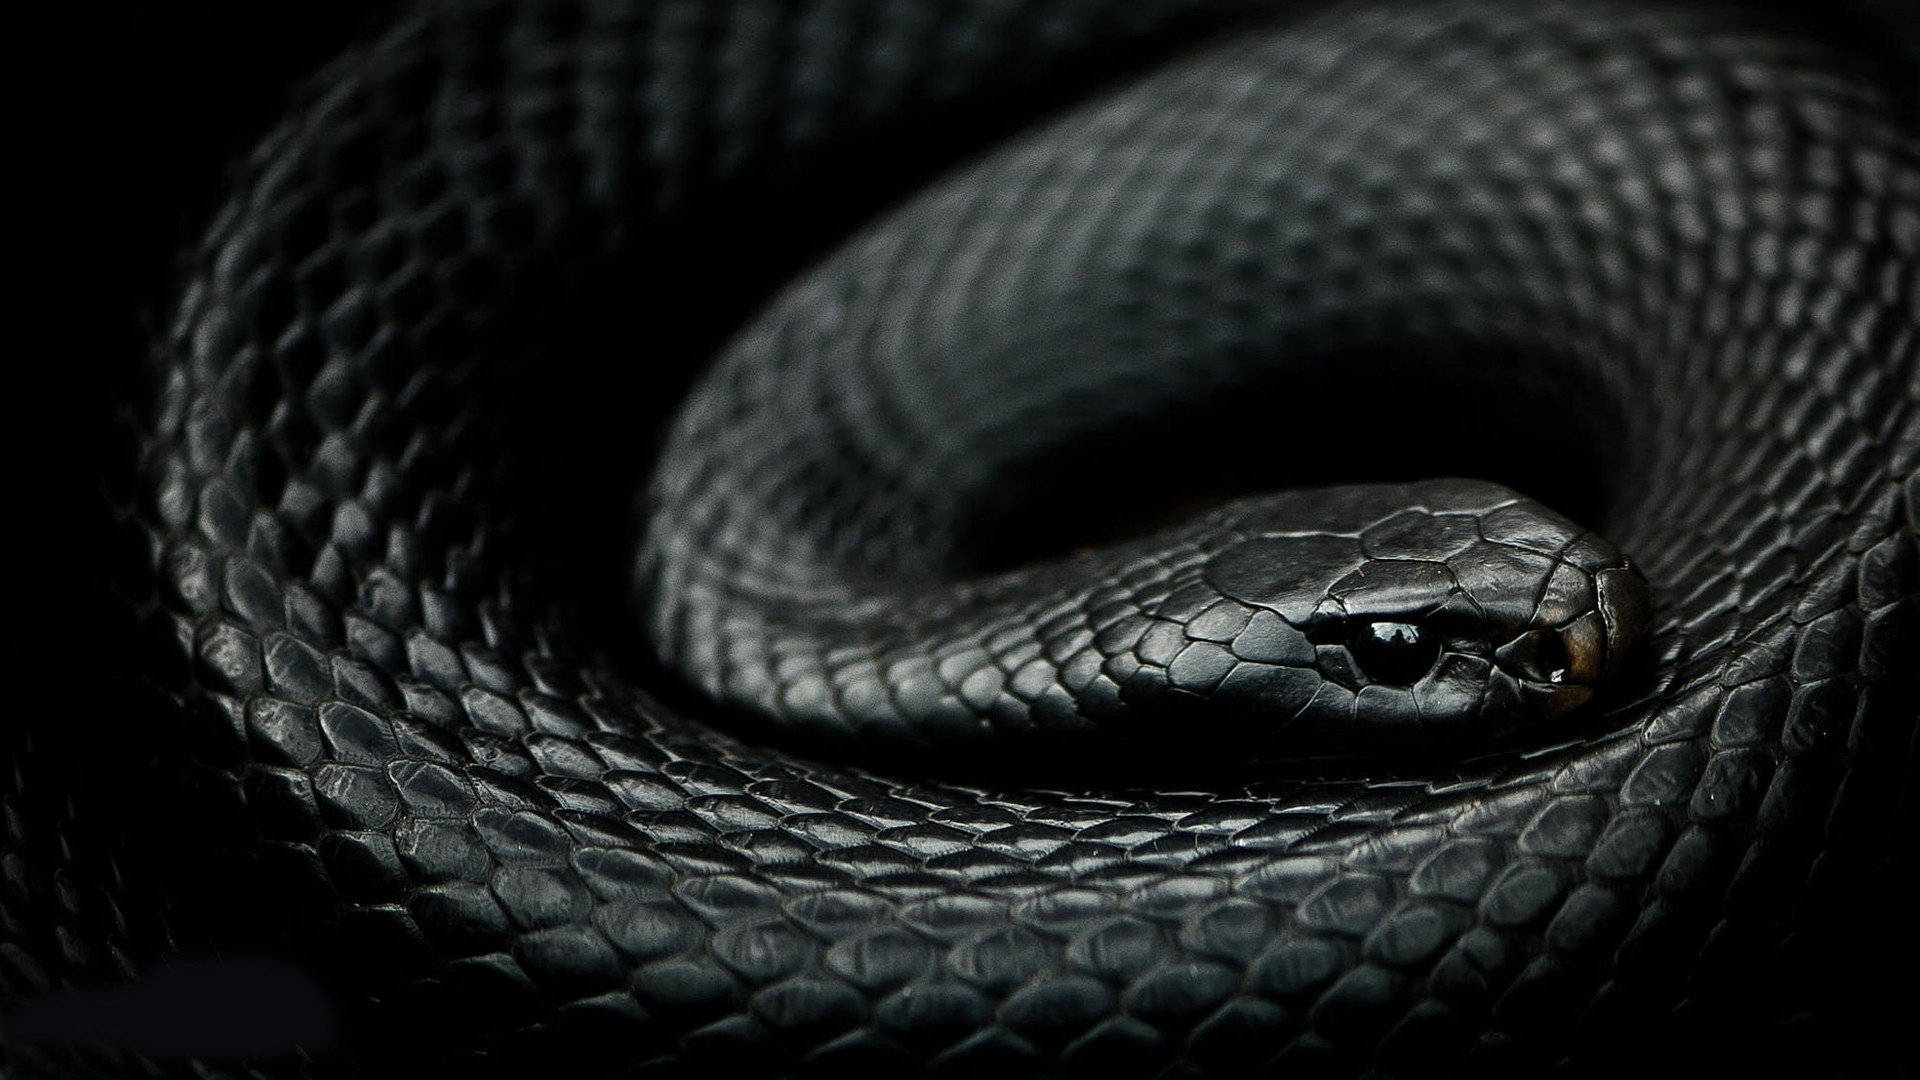 Midnightblack Scales Black Mamba Snake Could Be Translated To 